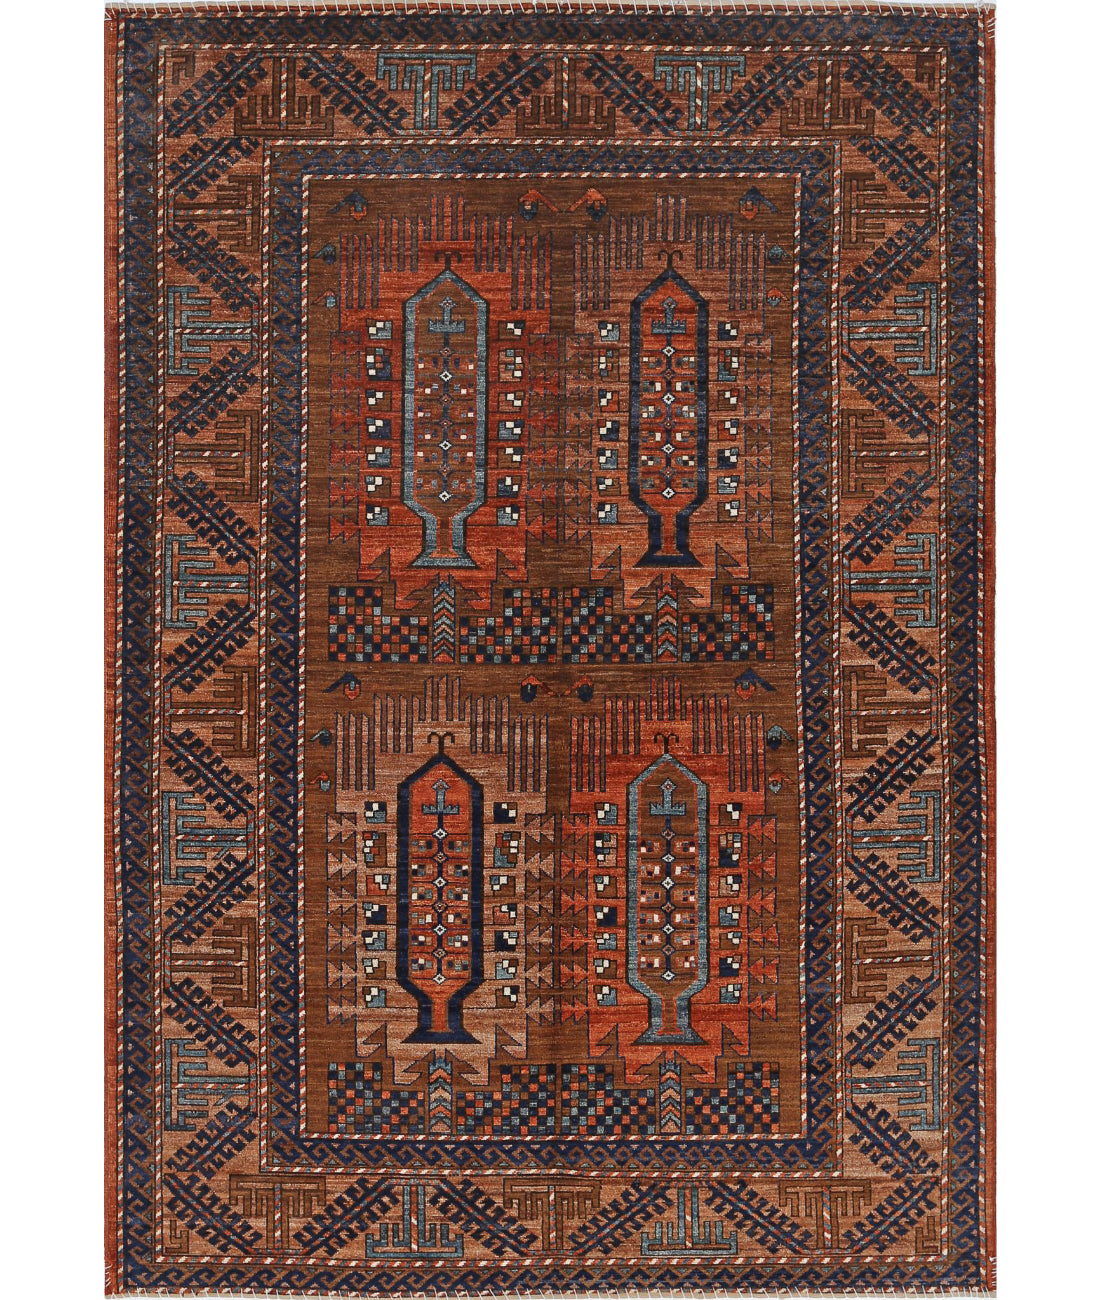 Hand Knotted Nomadic Caucasian Humna Wool Rug - 6'0'' x 8'9'' 6'0'' x 8'9'' (180 X 263) / Rust / Blue